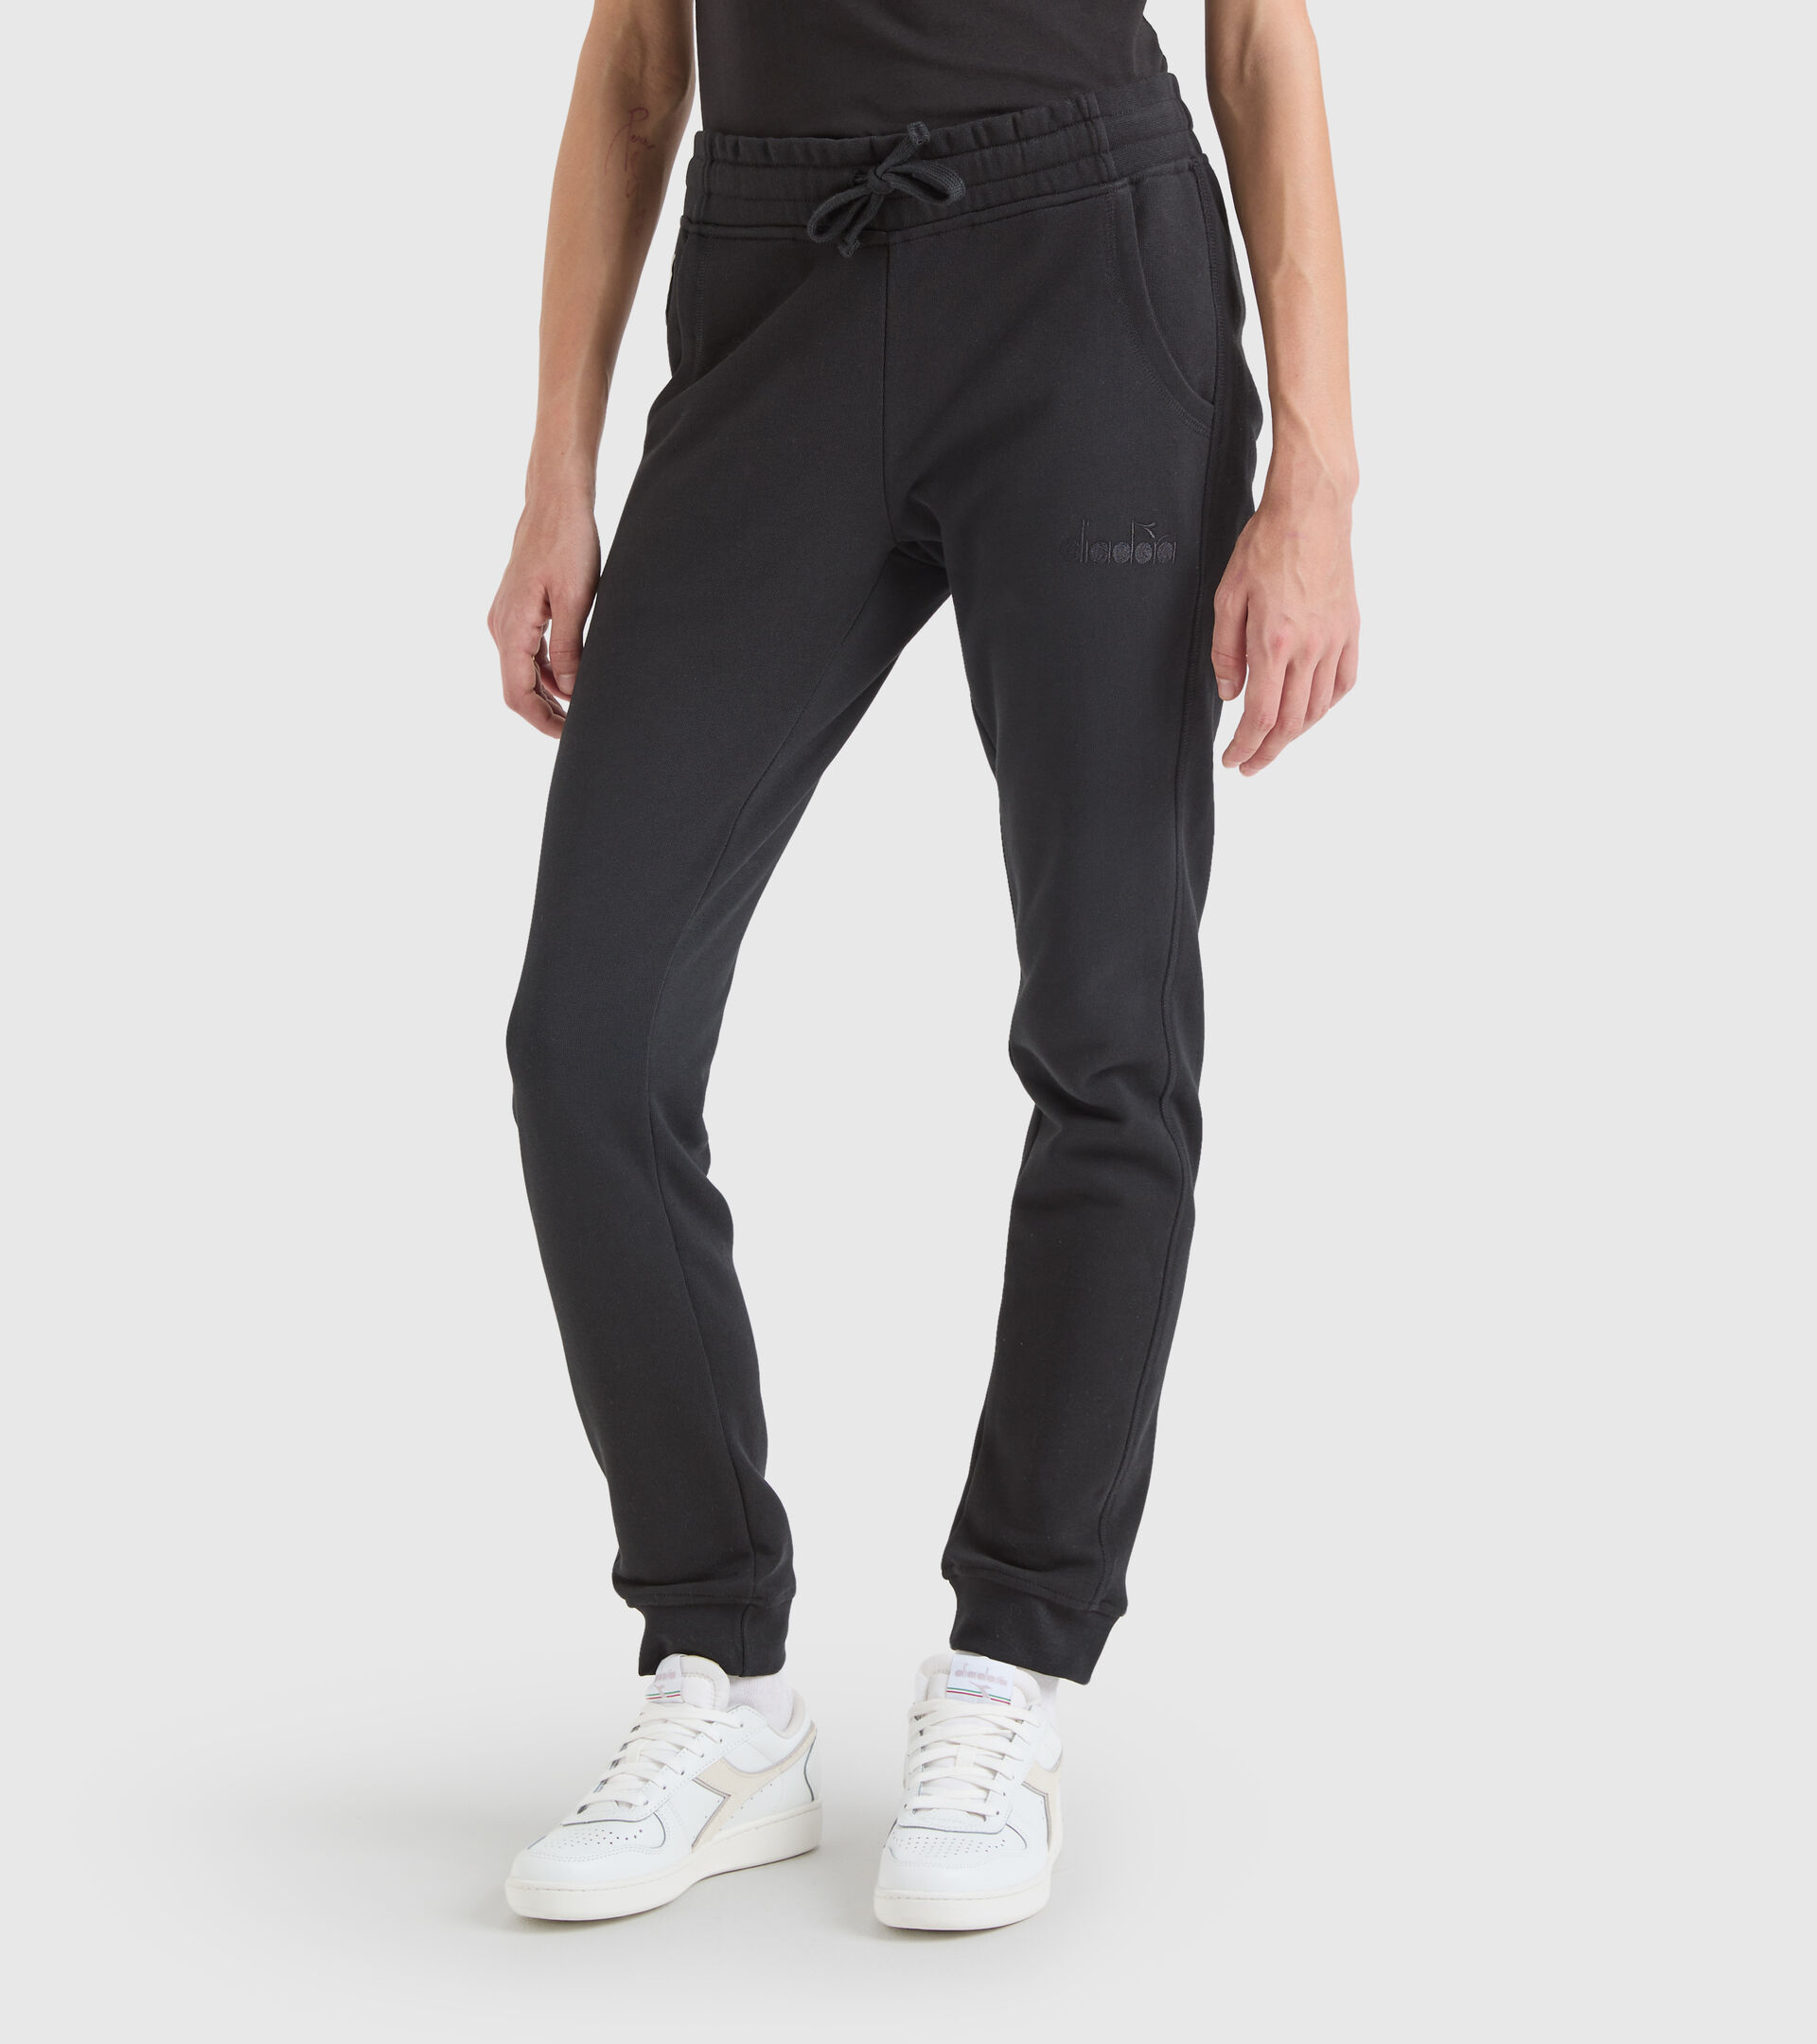 Cotton sports trousers - Made in Italy - Women L. JOGGER PANT MII BLACK - Diadora